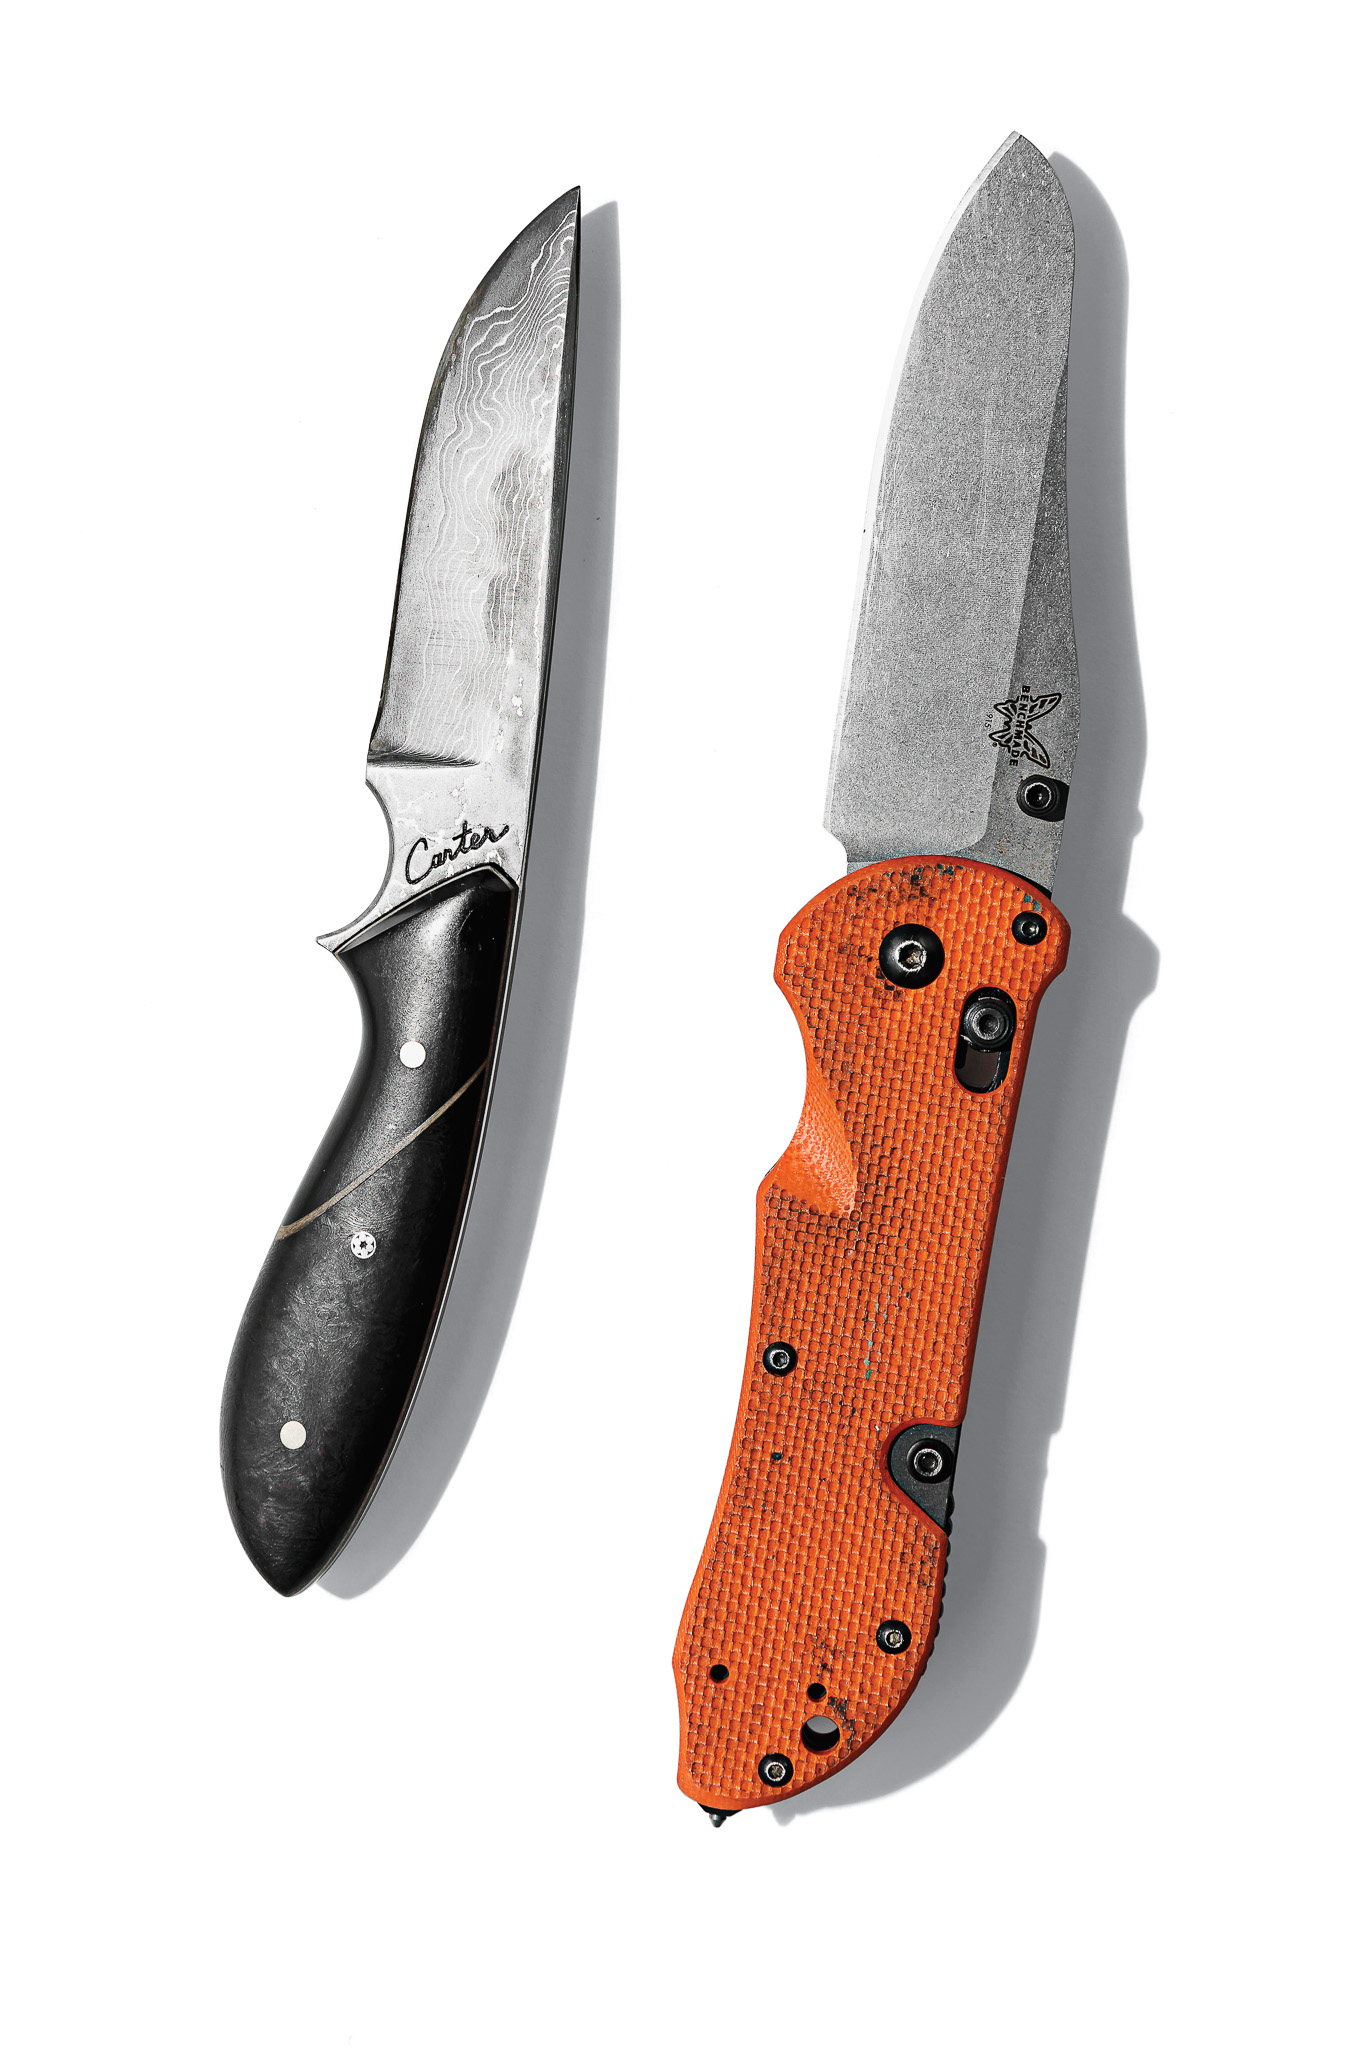 Two everyday carry knives made in Portland, Oregon.